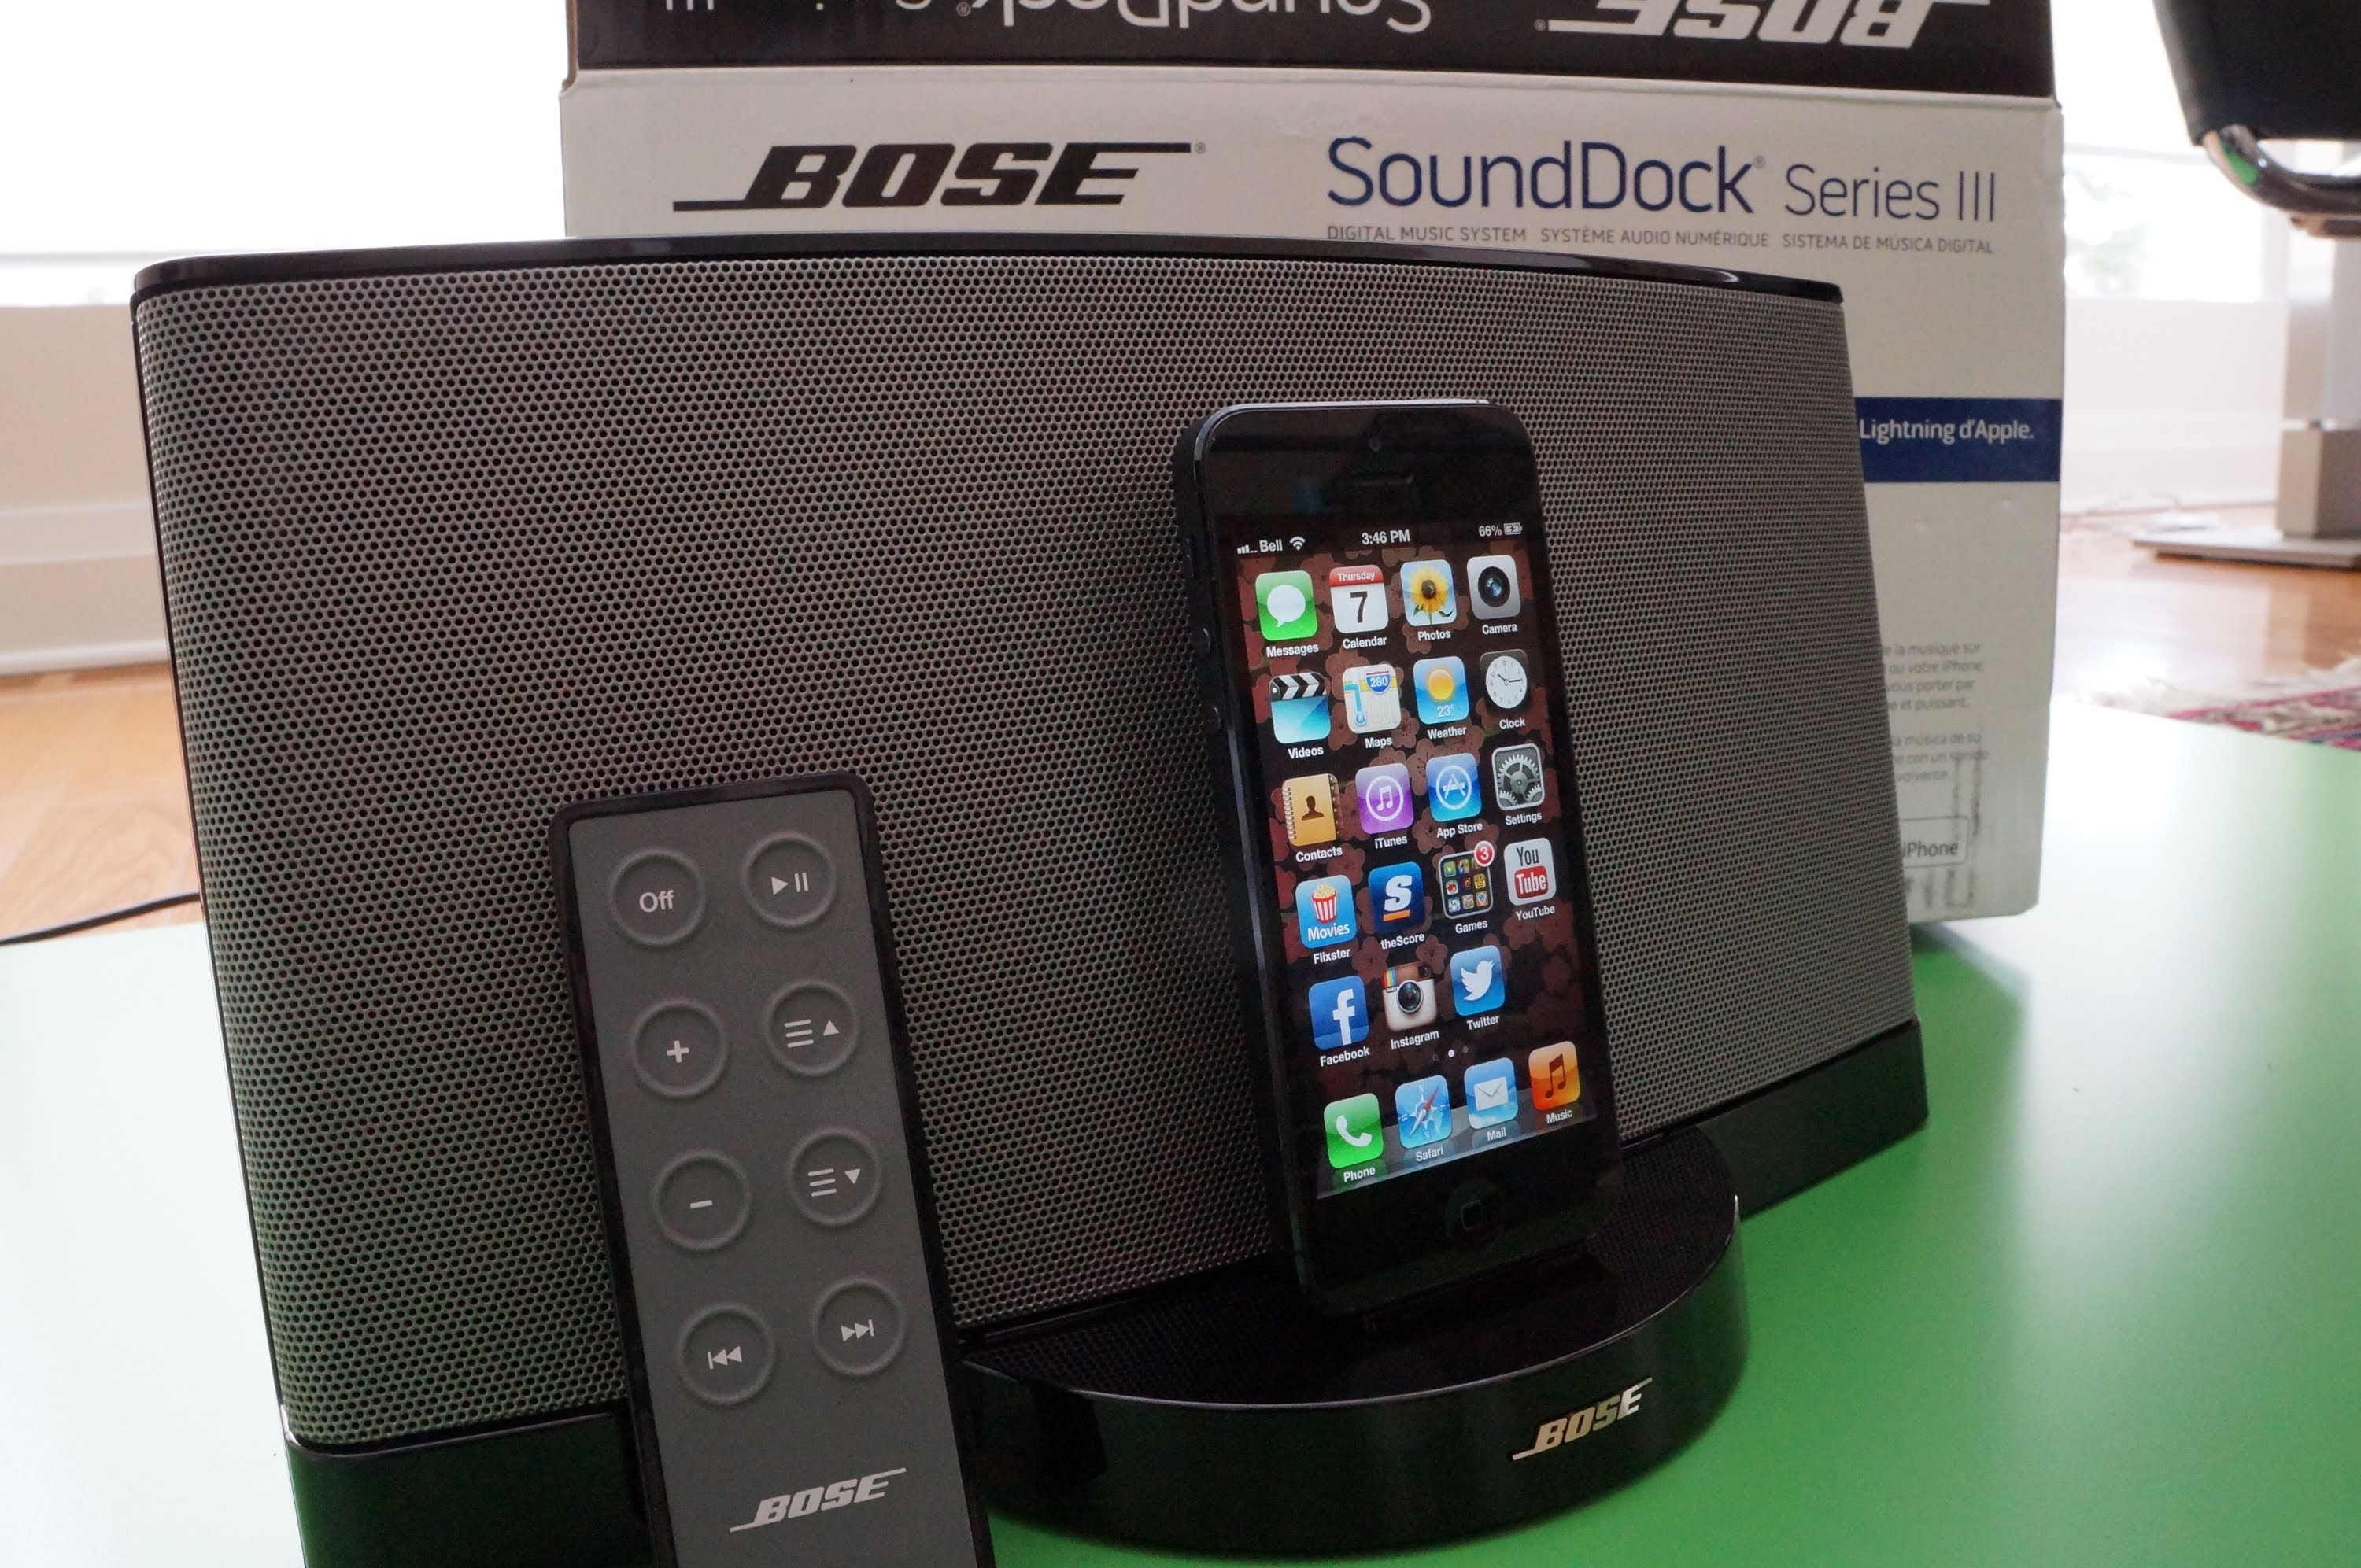 Bose Sounddock 3 REVIEW and Hands On - YouTube